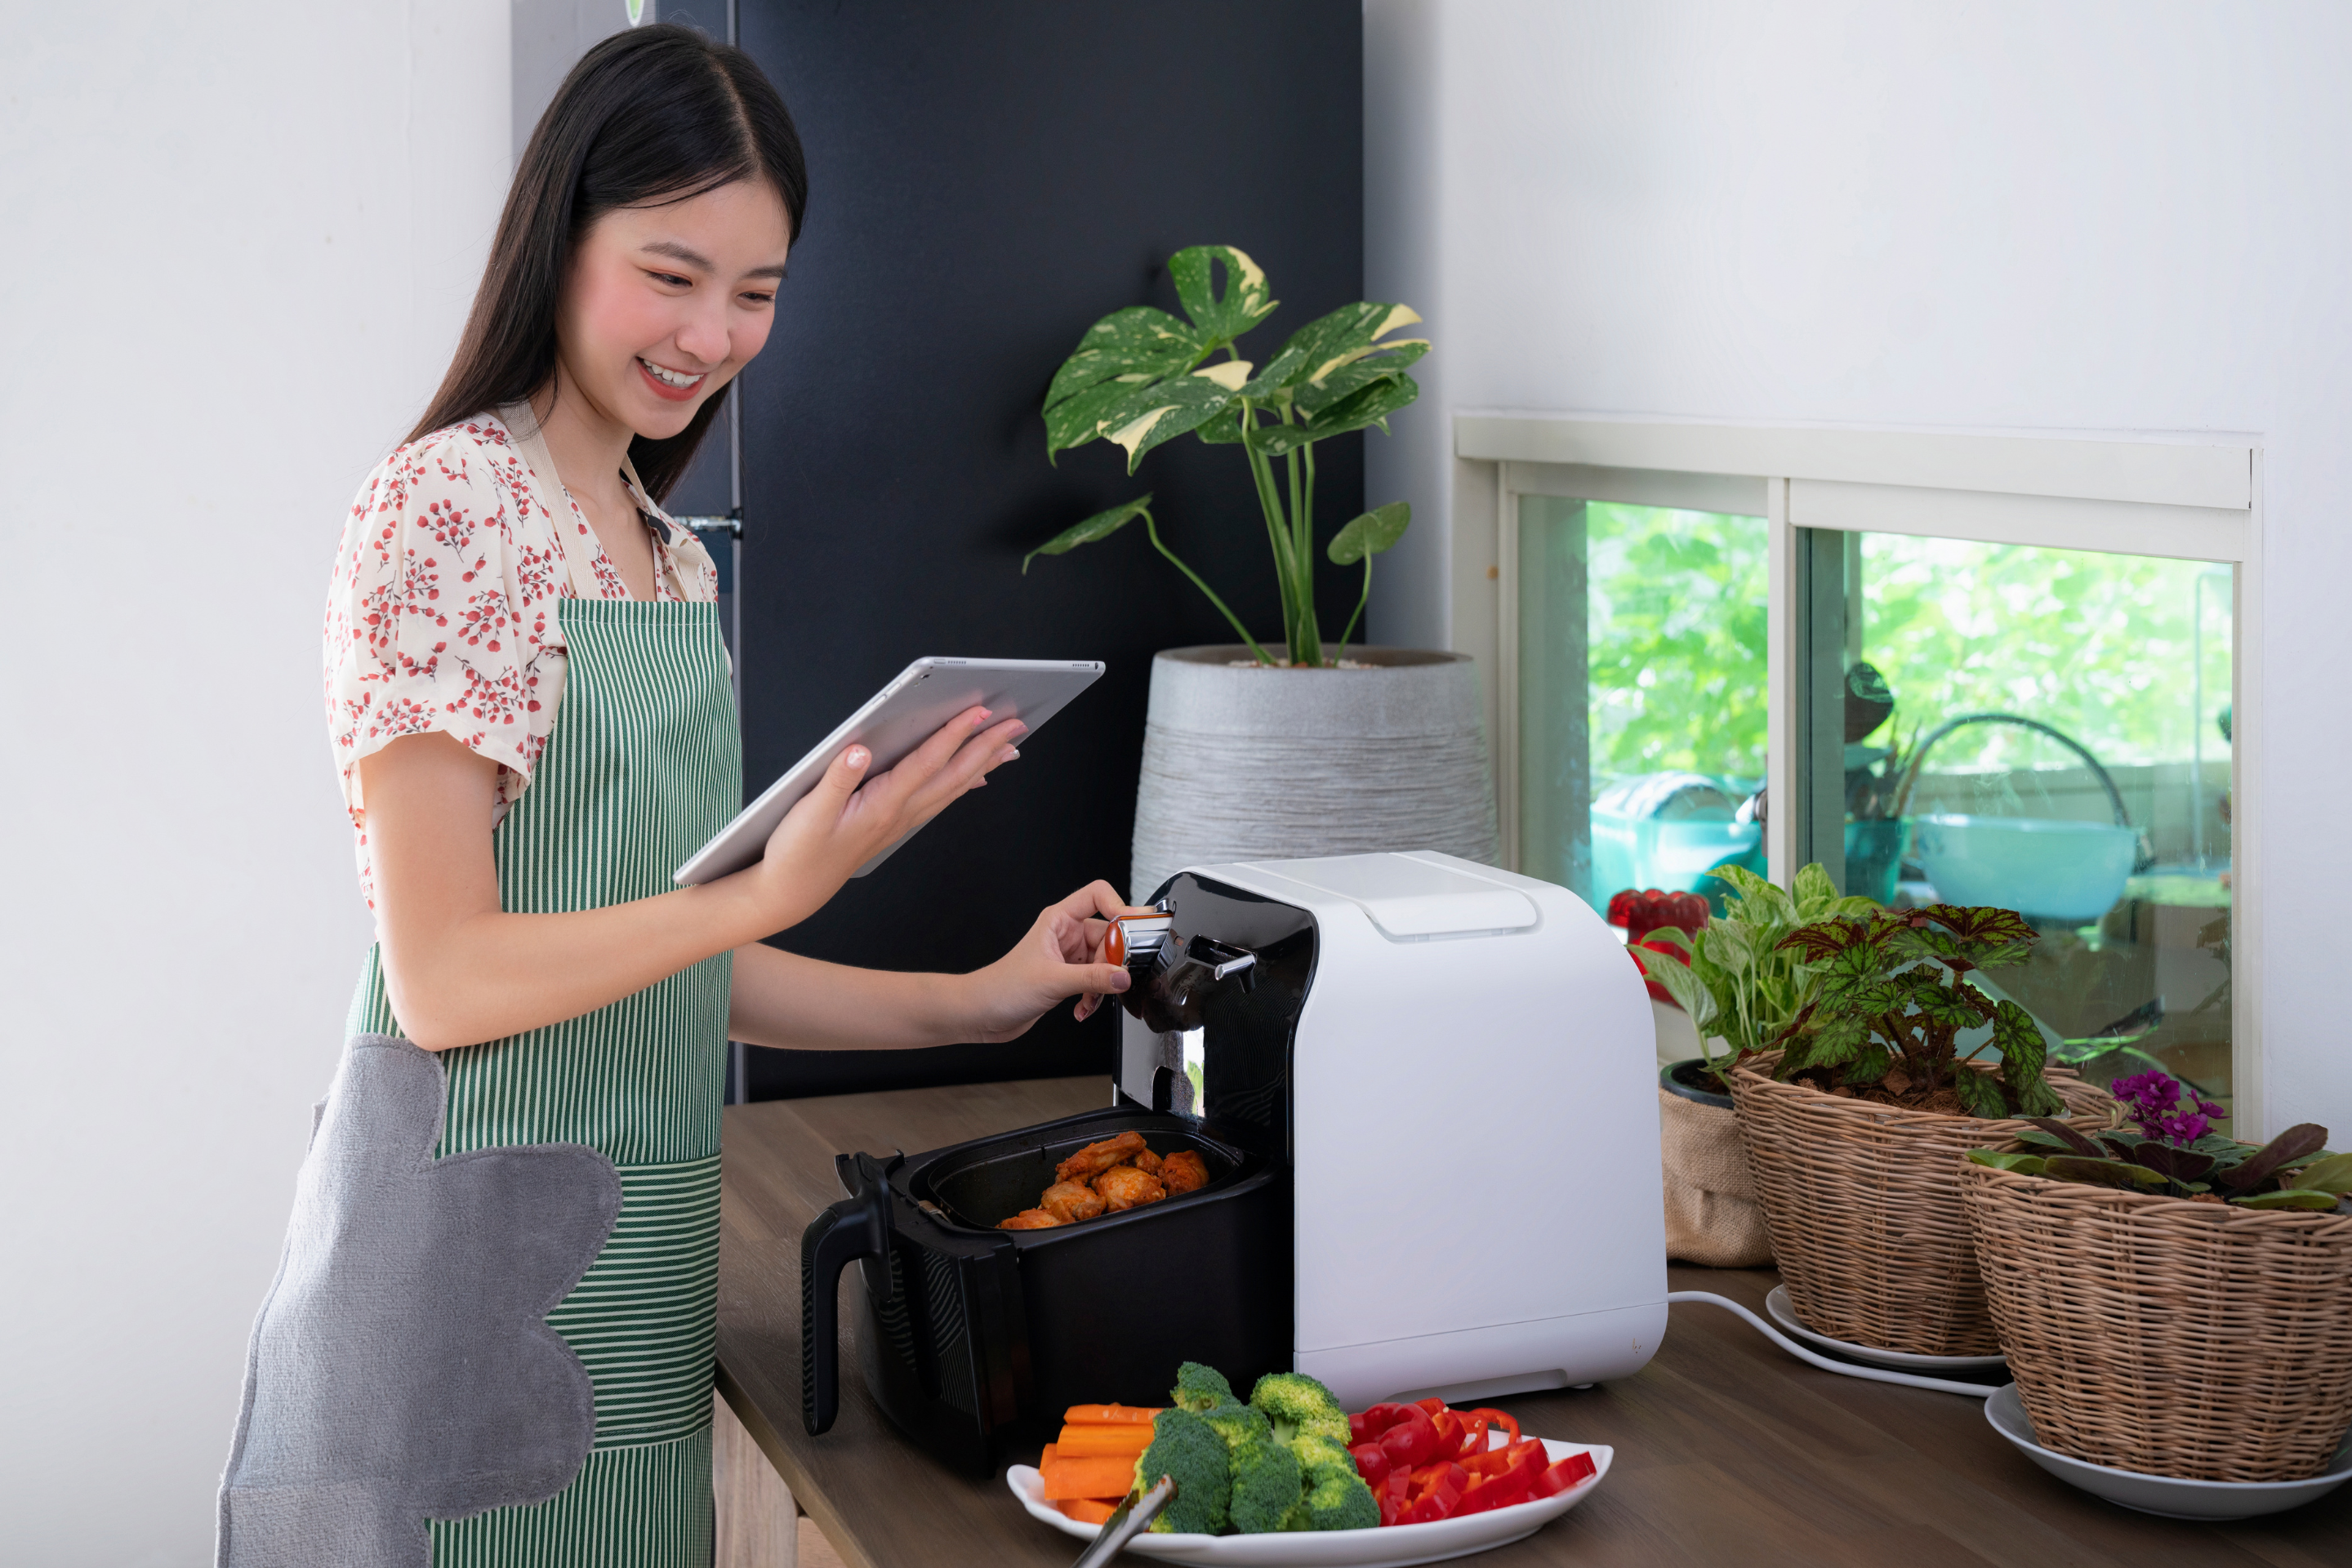 Air Fryer vs. Convection Toaster Oven: Which Should You Buy?